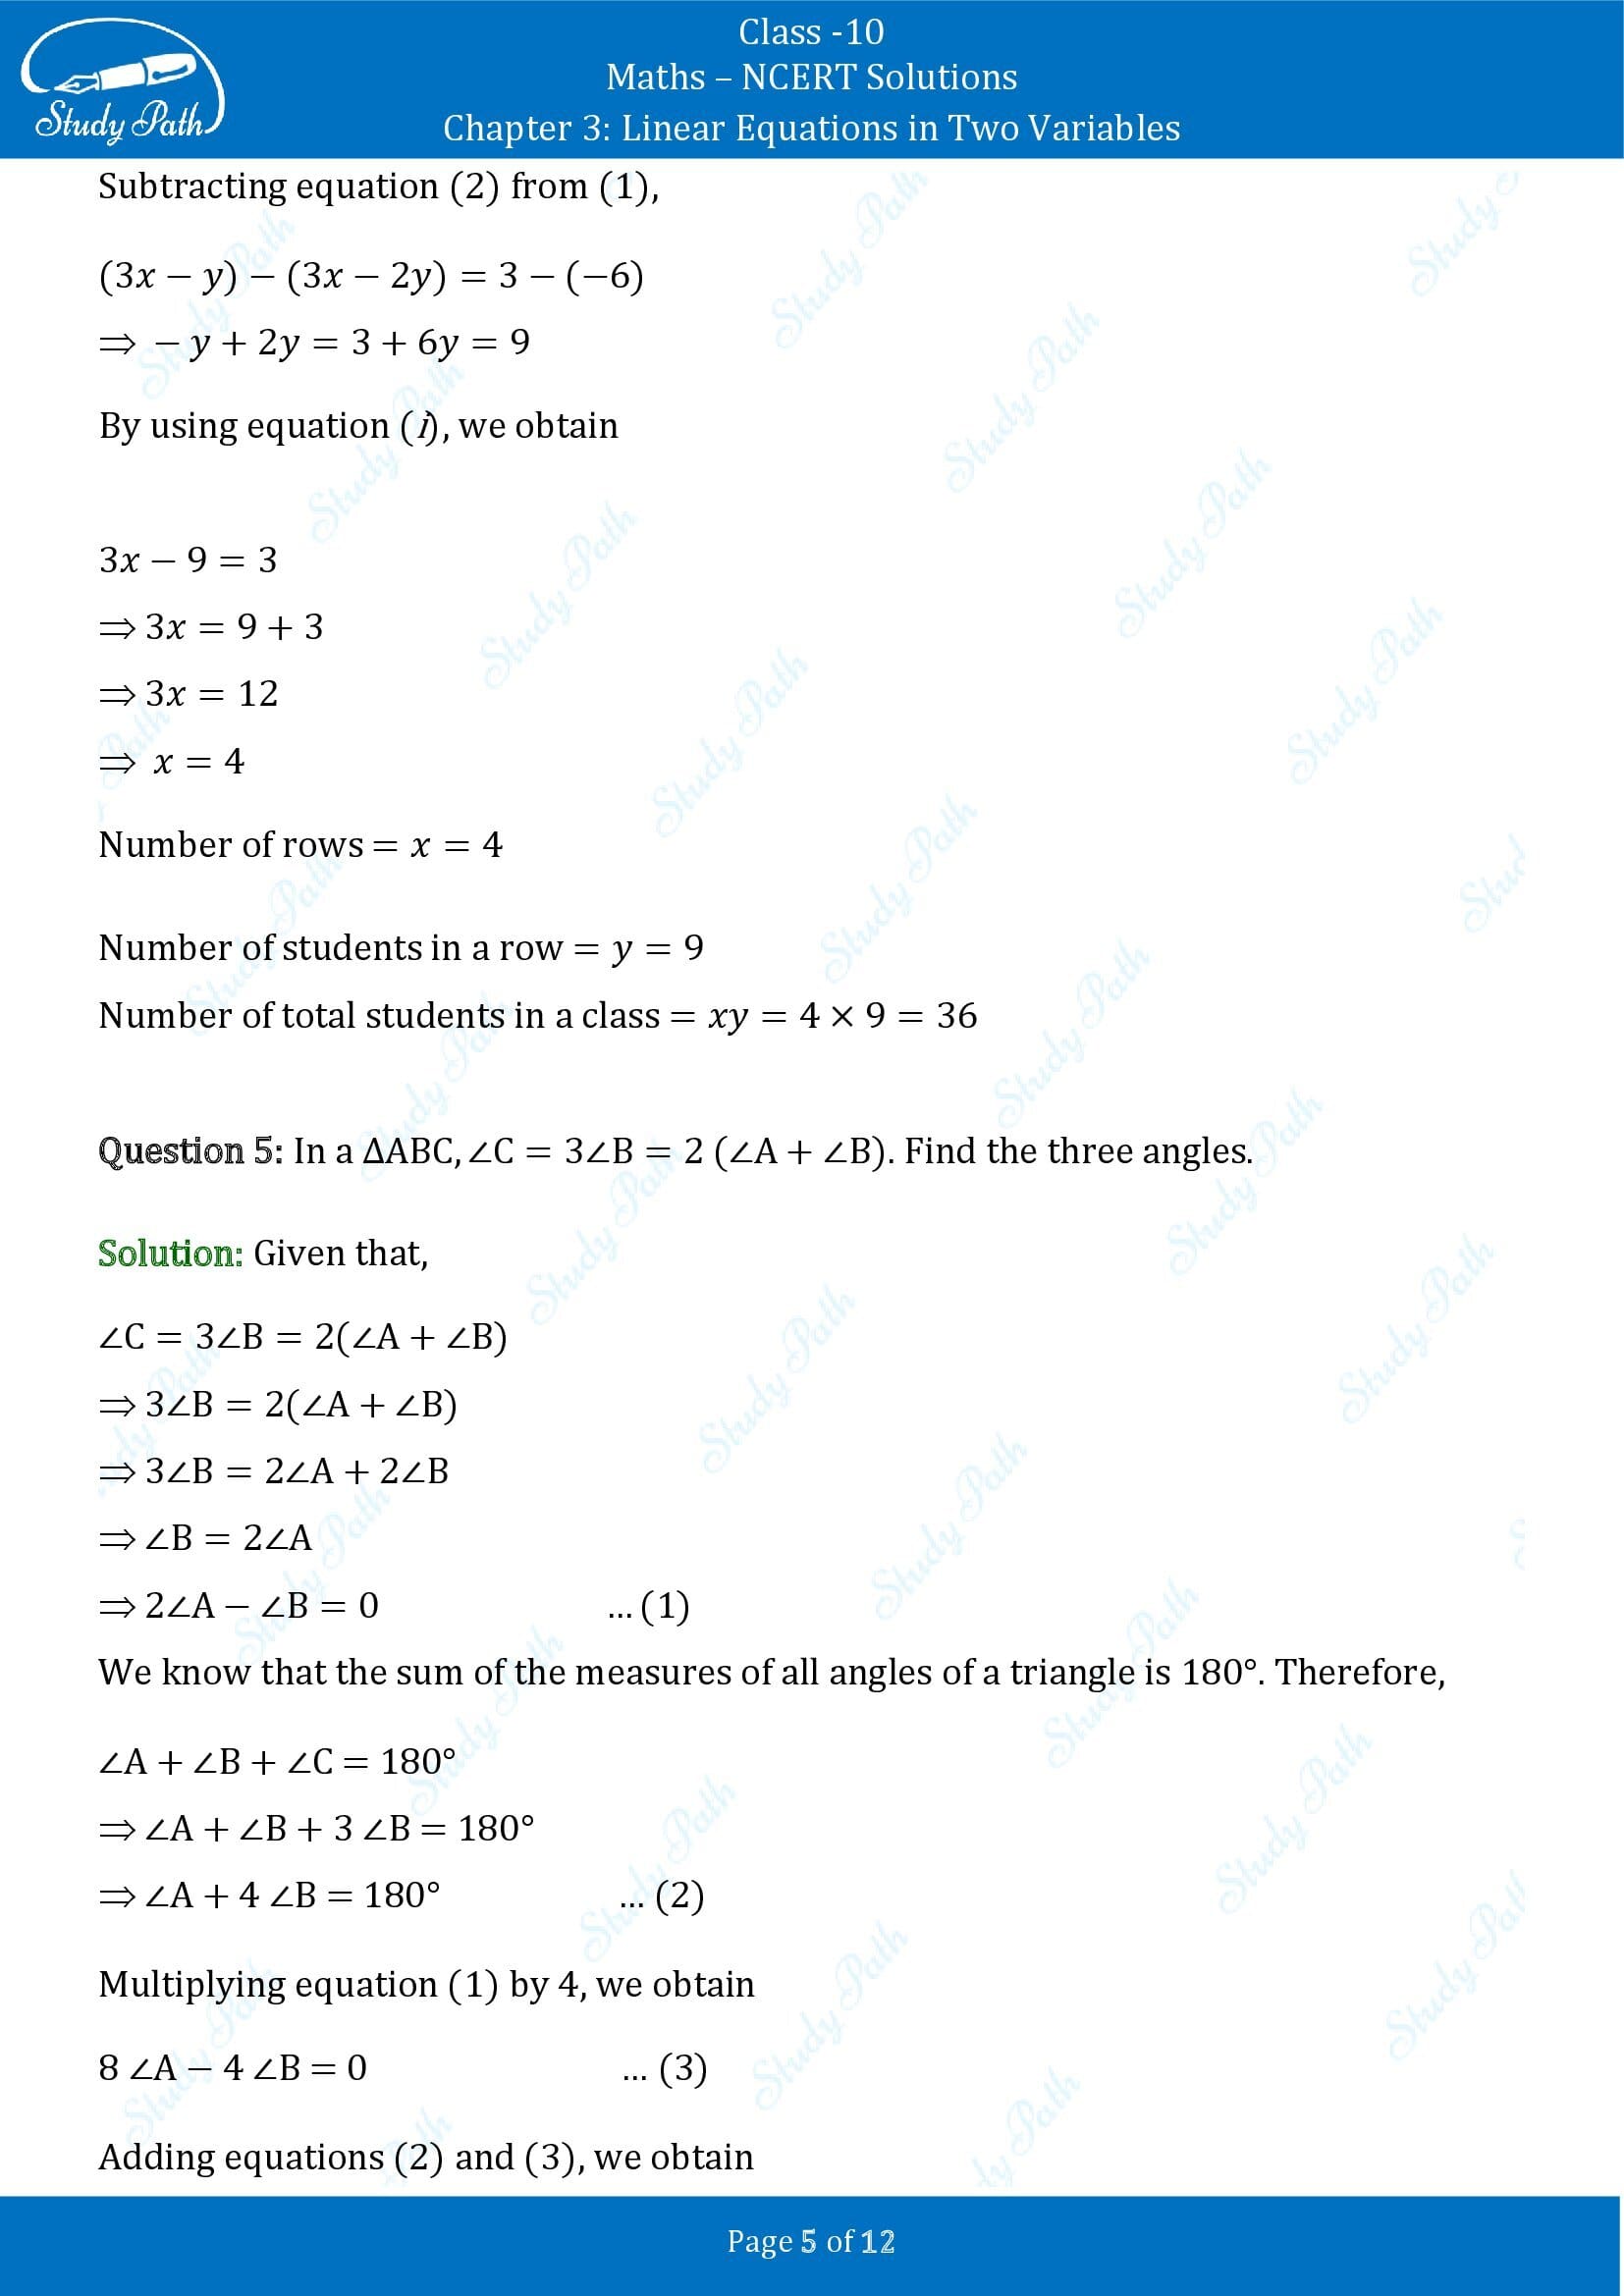 NCERT Solutions for Class 10 Maths Chapter 3 Linear Equations in Two Variables Exercise 3.7 00005